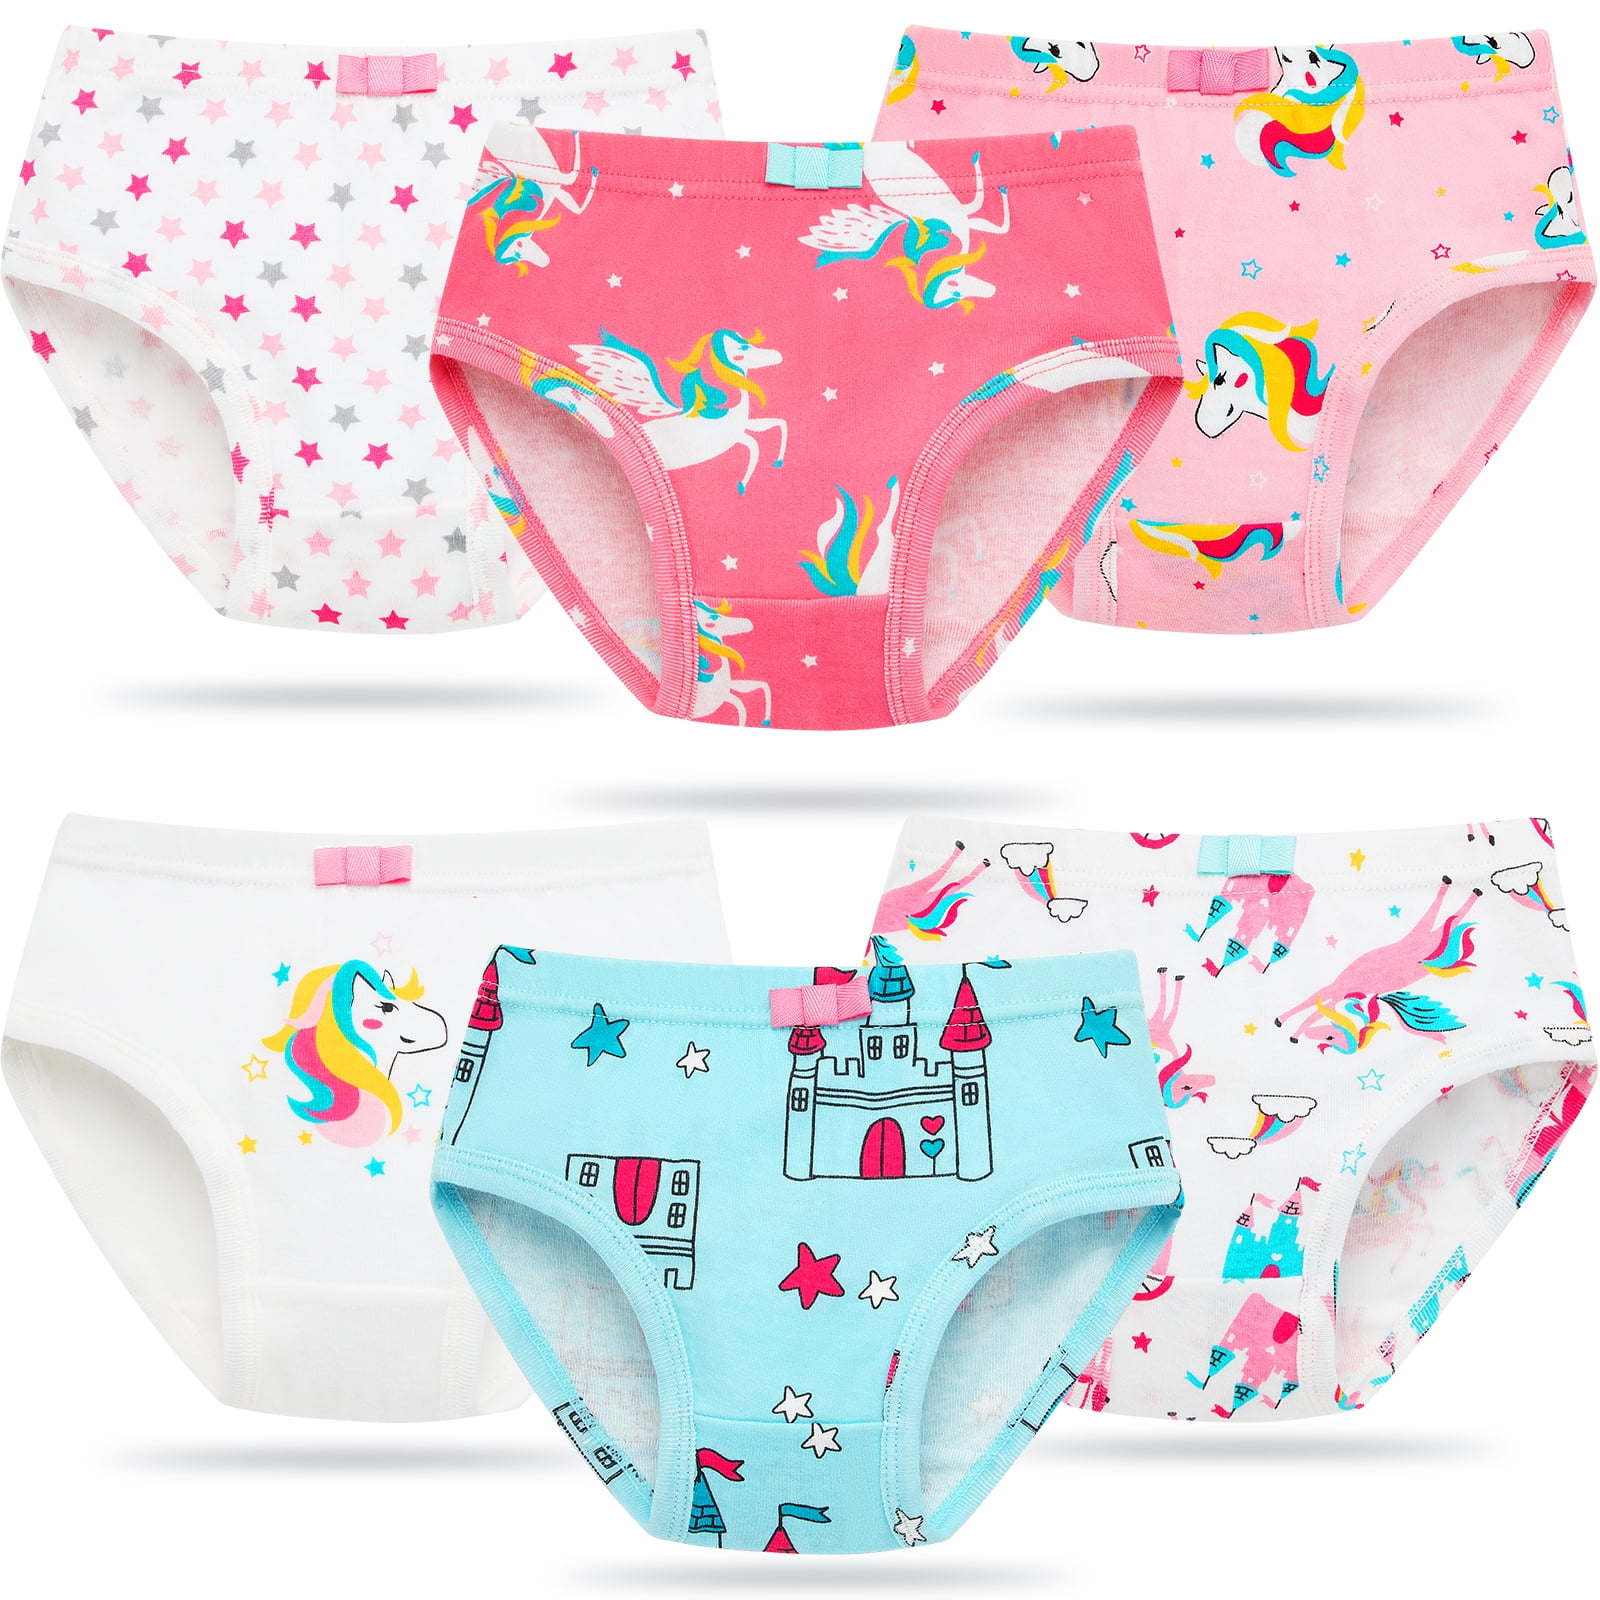 Jeccie 6 Packs Girls Underwear 100% Cotton Breathable Comfort Panties for  Toddler 2-3 Years - Unicorn,Castle,Stars 